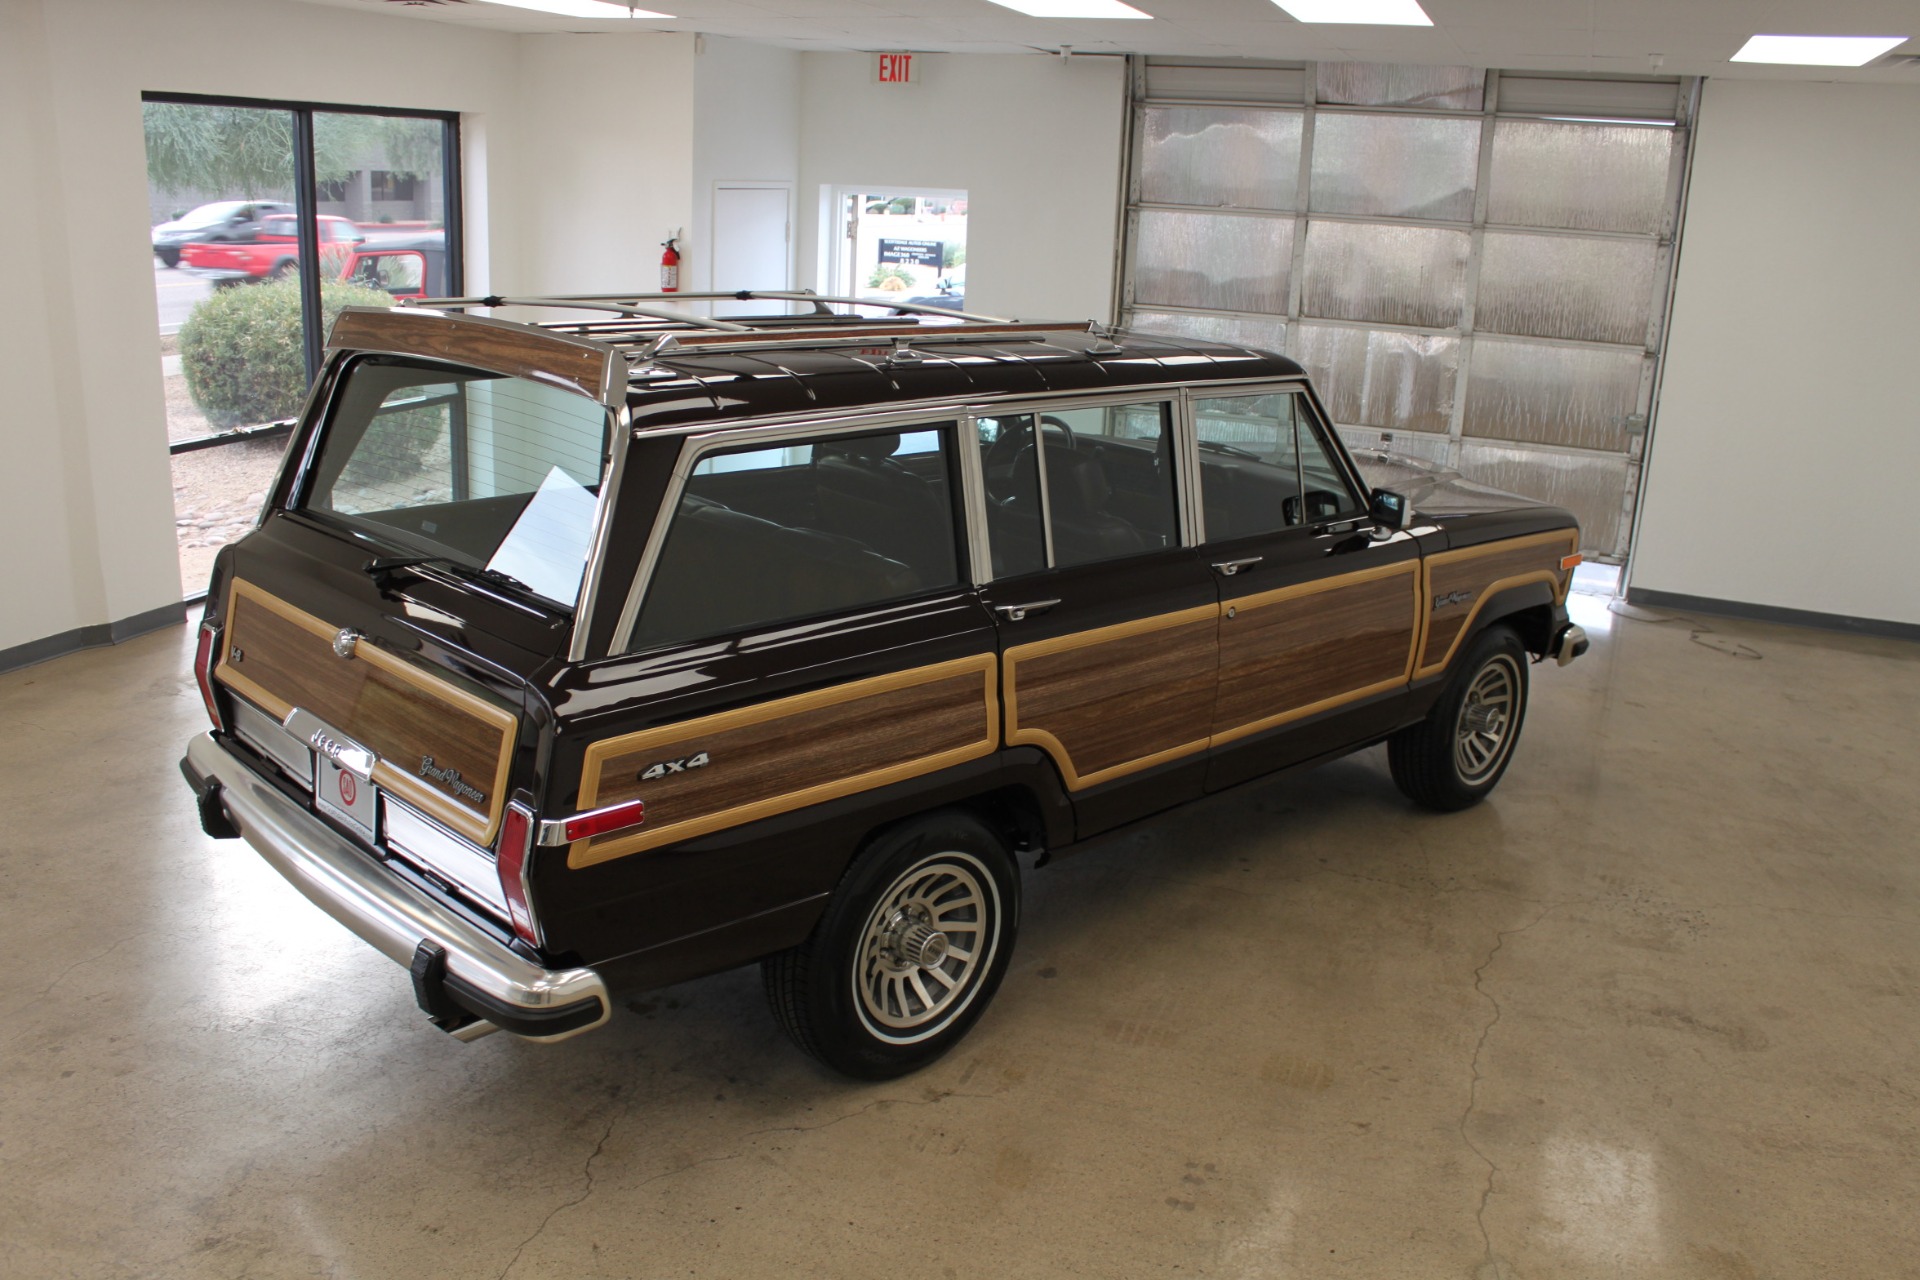 Used-1989-Jeep-Grand-Wagoneer-4WD-Chevelle